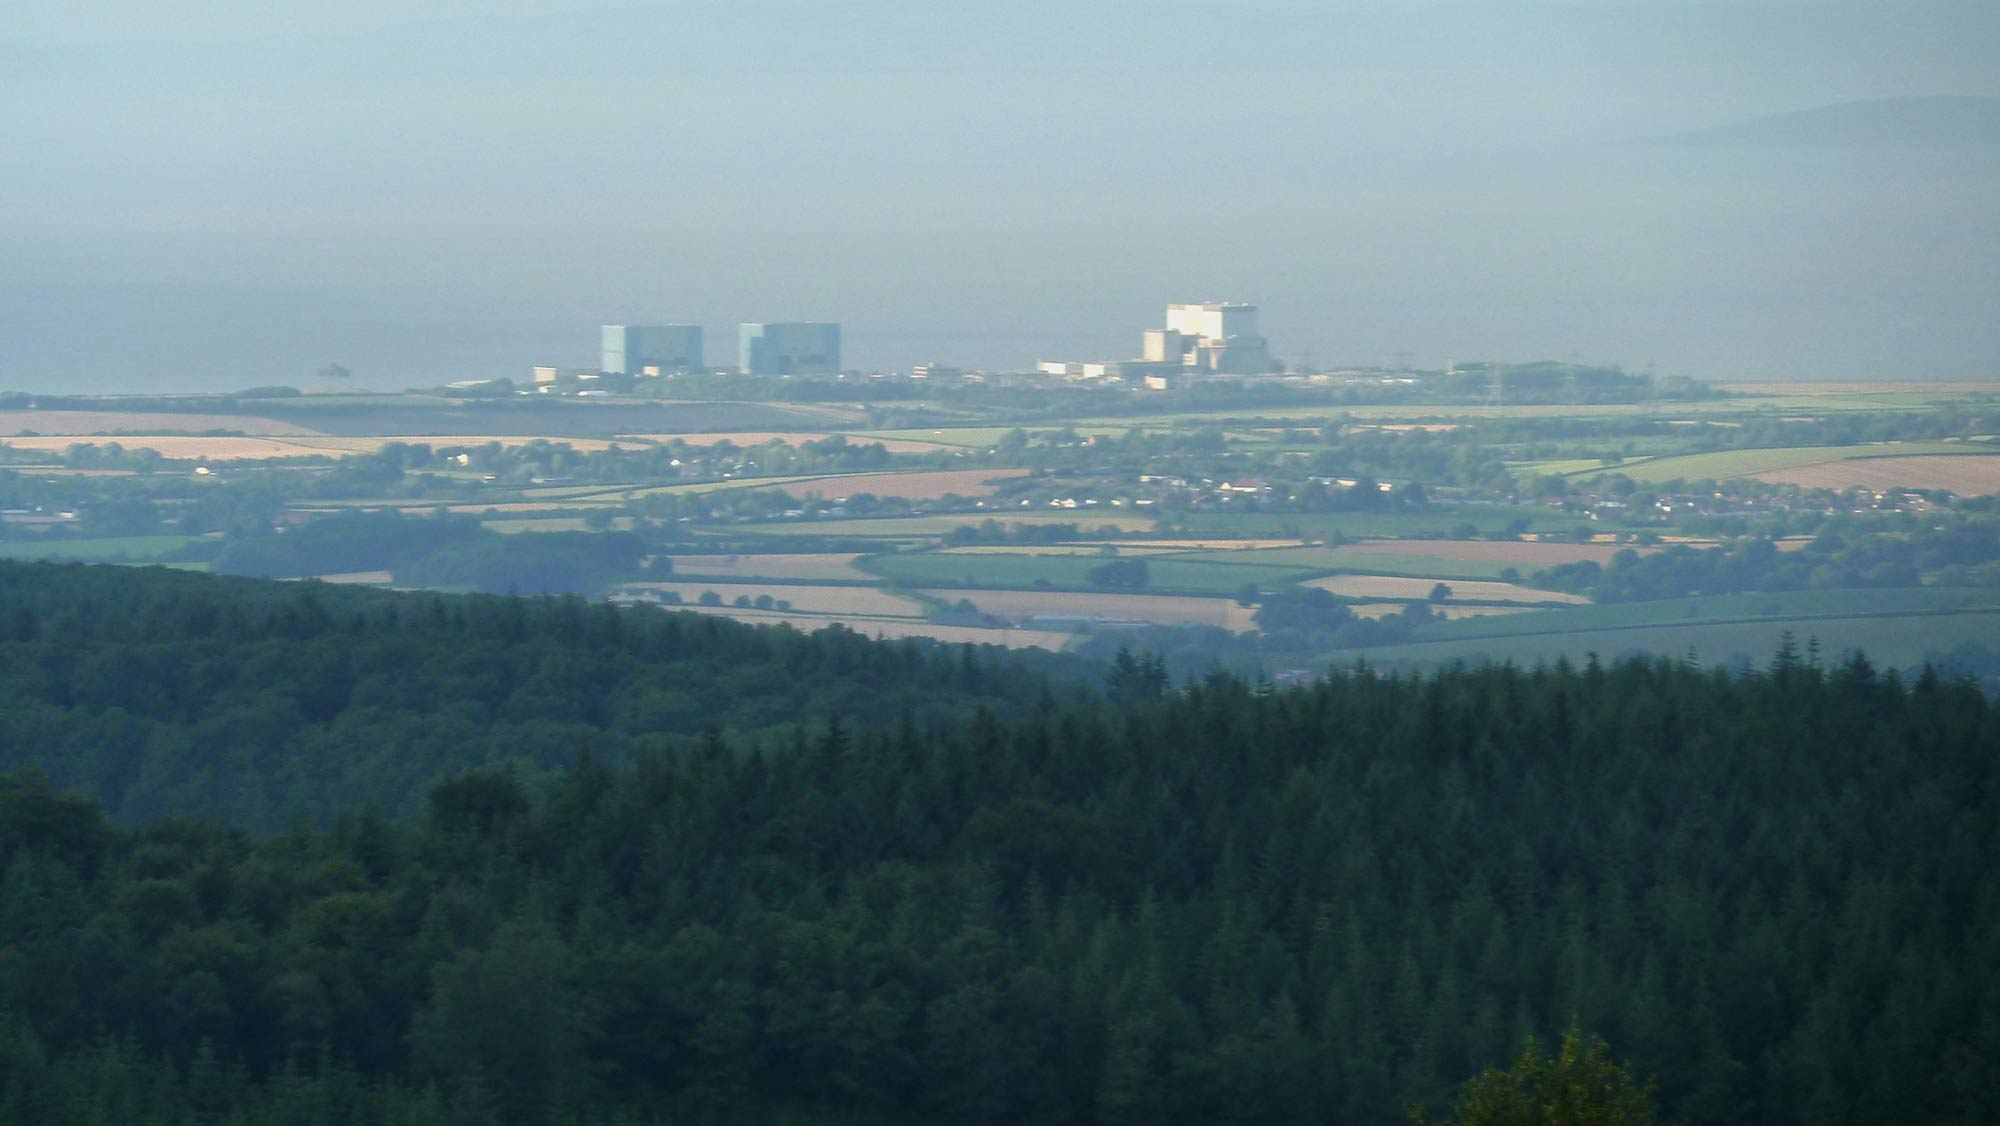 View of Hinkley Point C